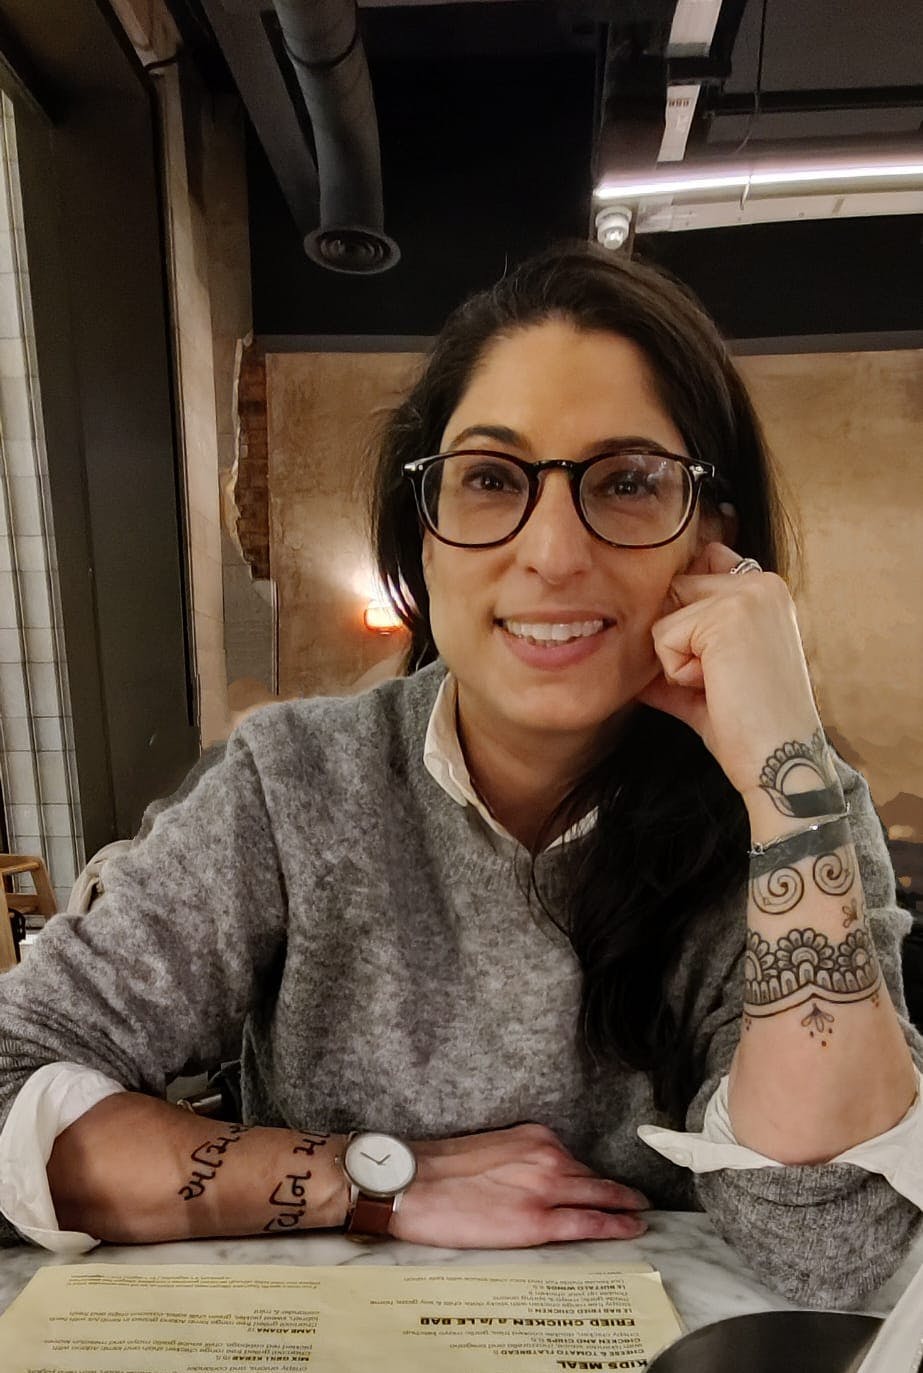 Sinéad, an olive-skinned woman, sits at a table wearing a grey wool jumper. She has dark brown mid length hair, wears glasses and has tattoos on both arms.